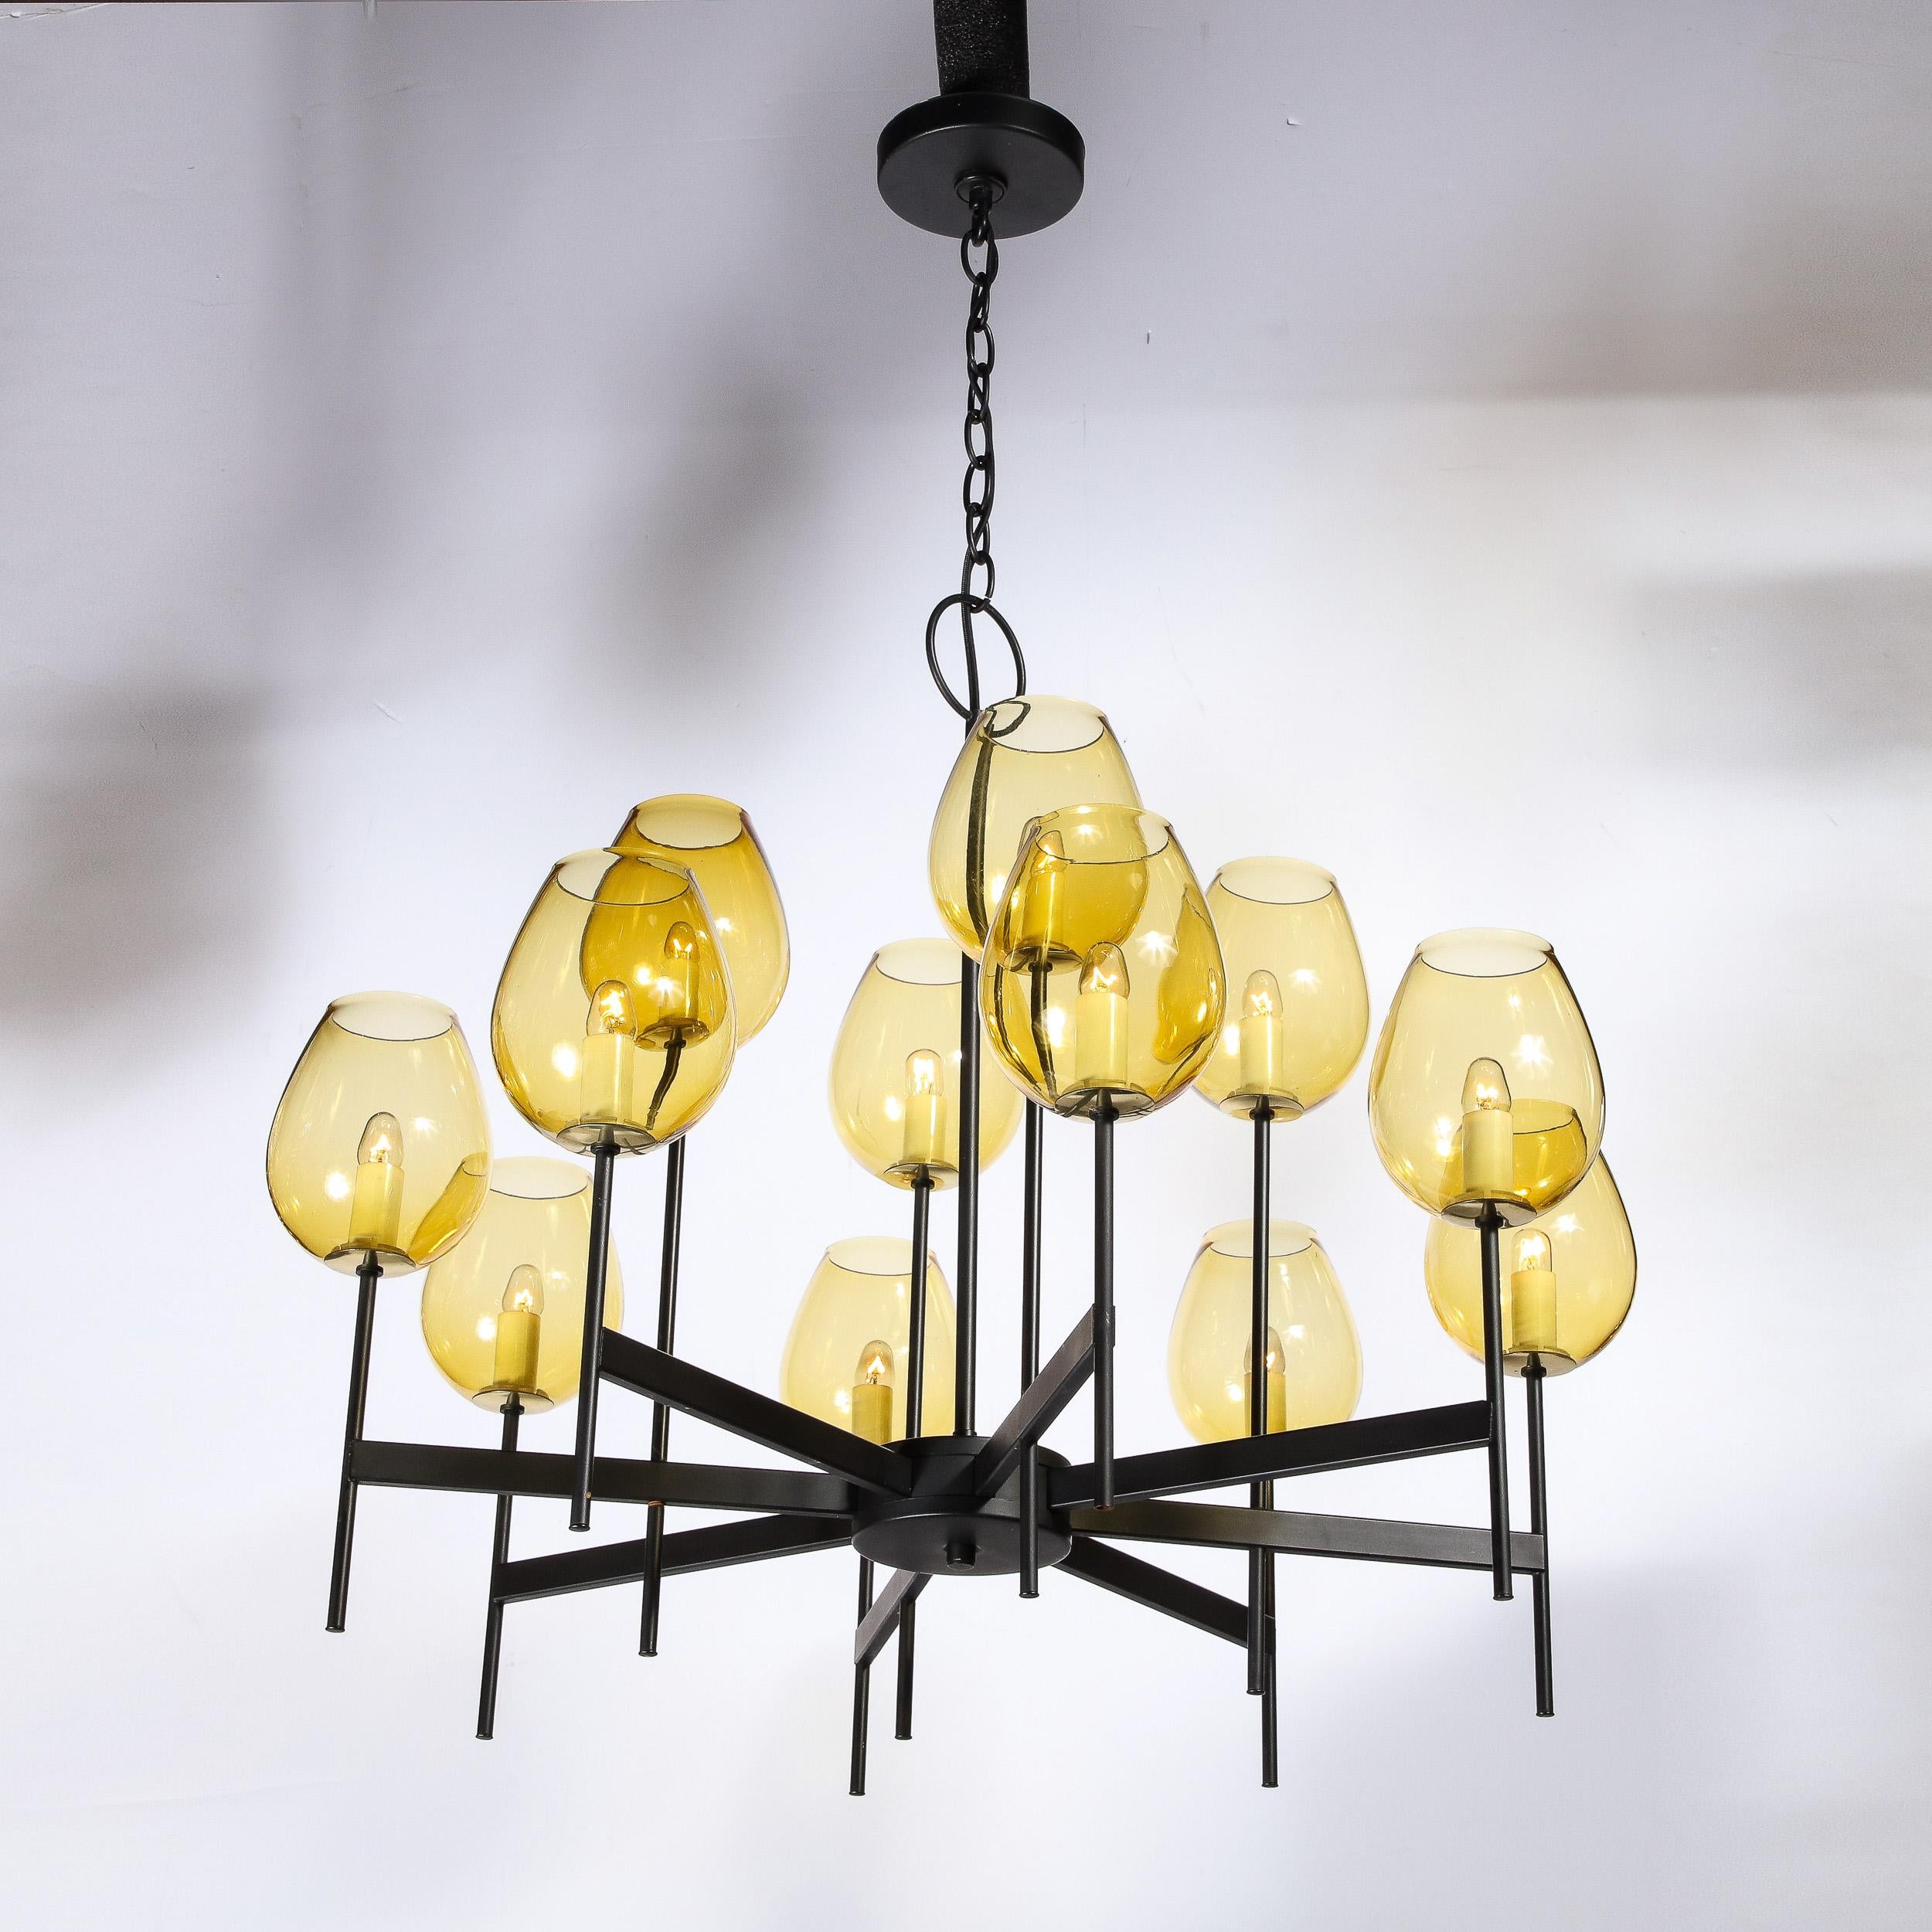 This elegant Modernist Eight Arm Chandelier in Black Enamel and Citrine Shades by Lightolier originates from the United States, Circa 1970. Features a delicate framework of supporting arms expanding from the central rod in beautifully delicate